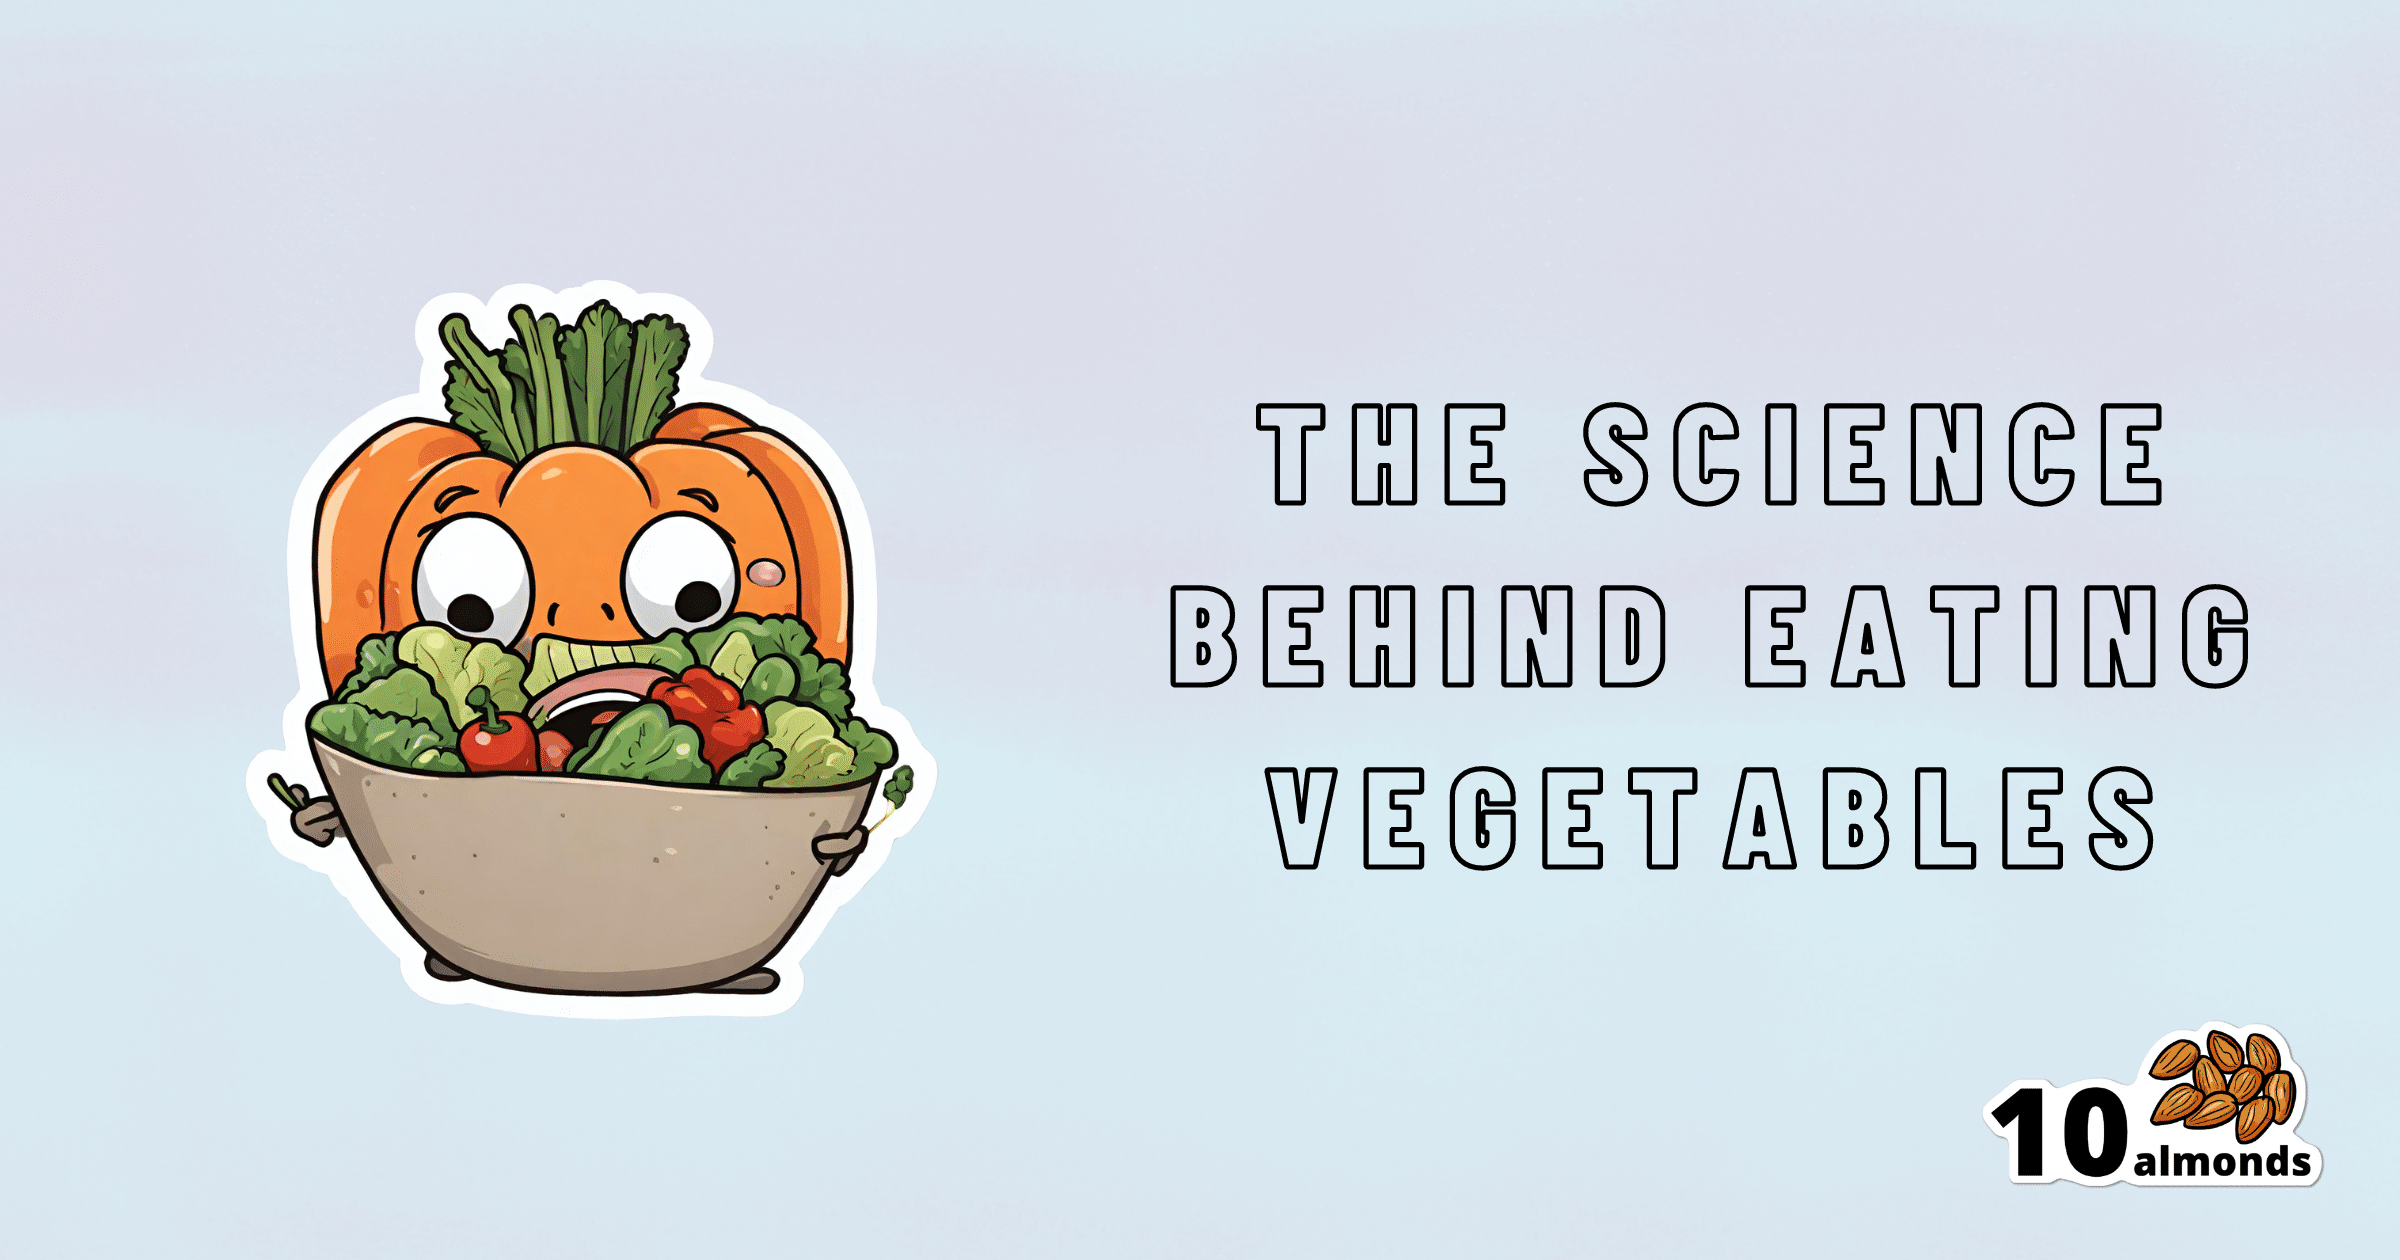 Exploring the relationship between tastebuds and veggies in creating a delectable salad.